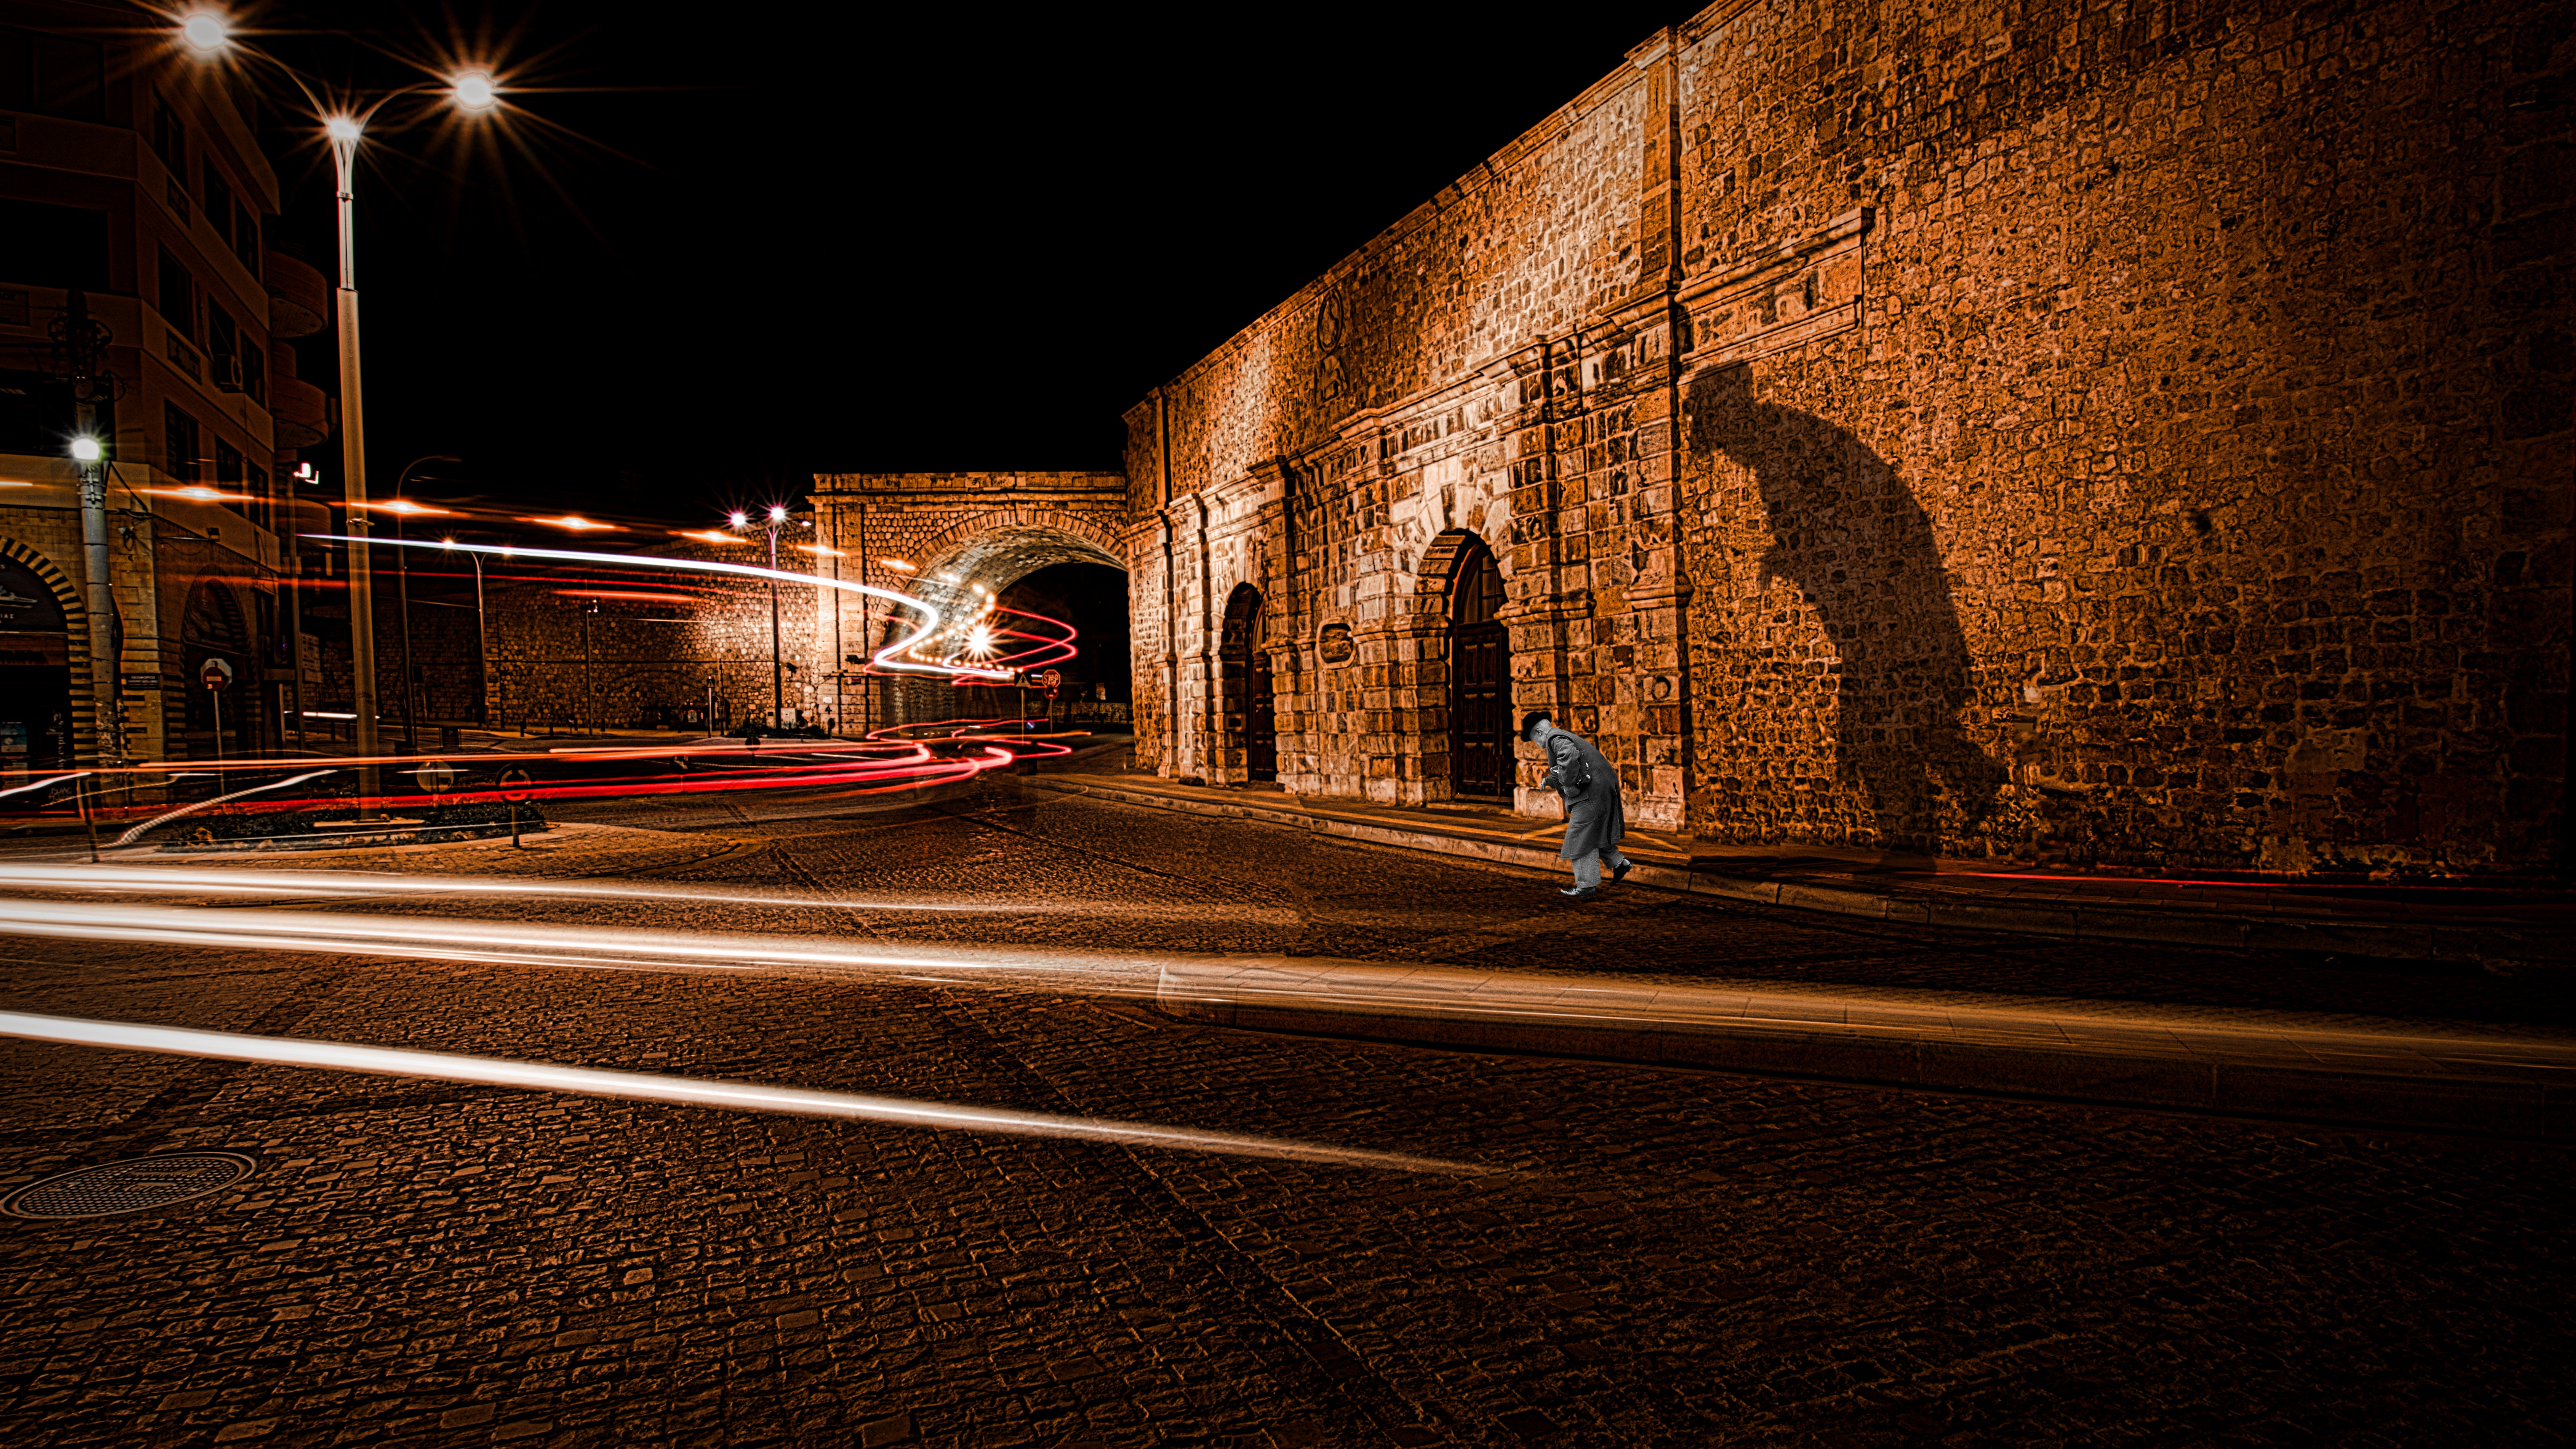 Brown Concrete Wall during Night Time Photo, Arches, Night lights, Time lapse, Street, HQ Photo